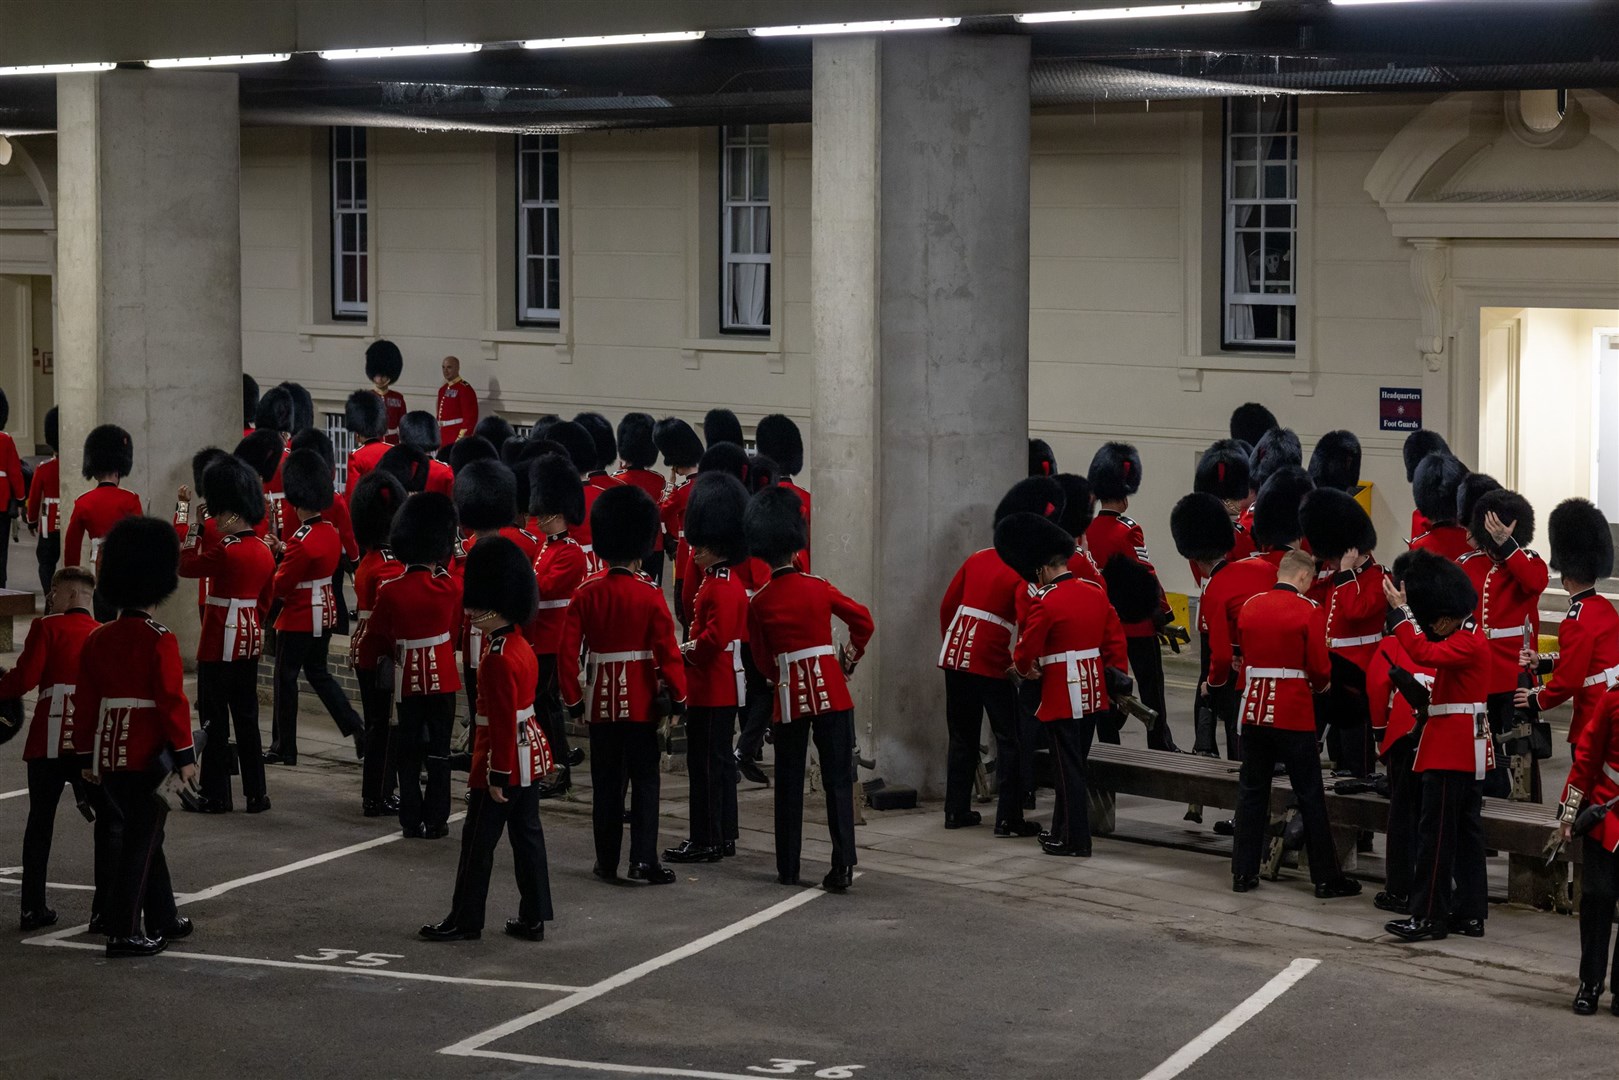 The rehearsal took place early in the morning (Corporal Paul Watson/MOD/PA)